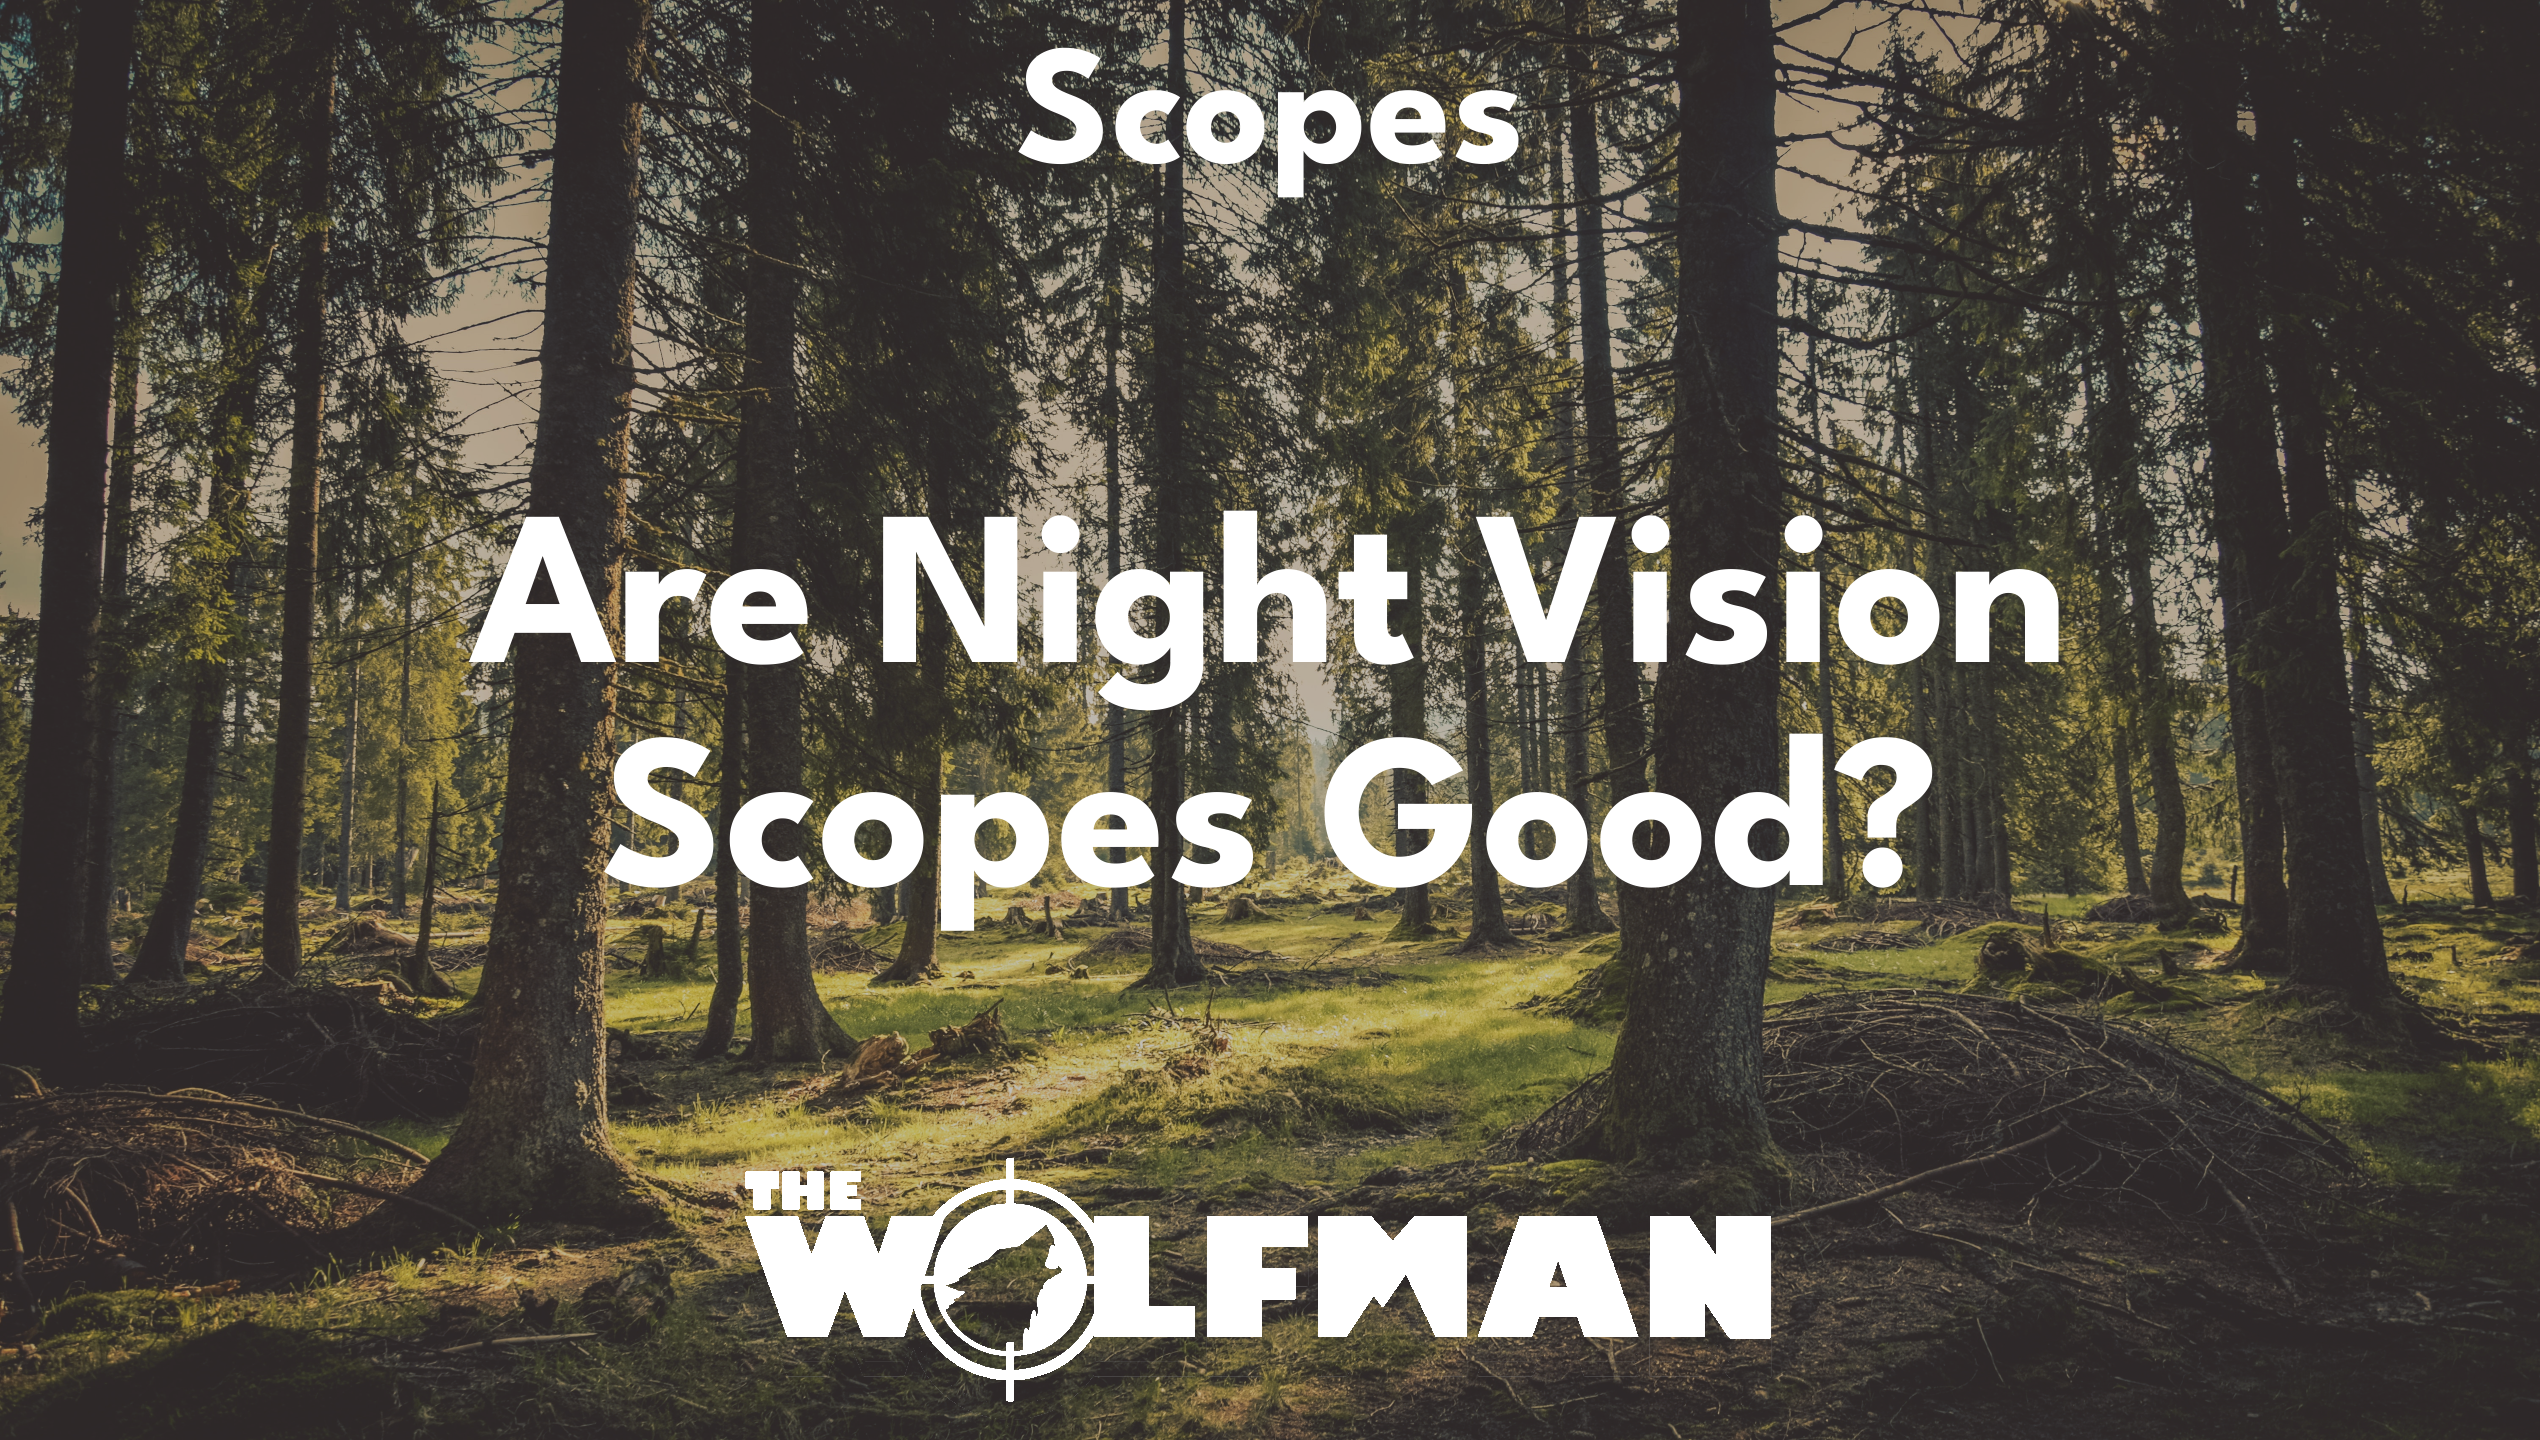 Are Night Vision Scopes Good? — The Wolfman